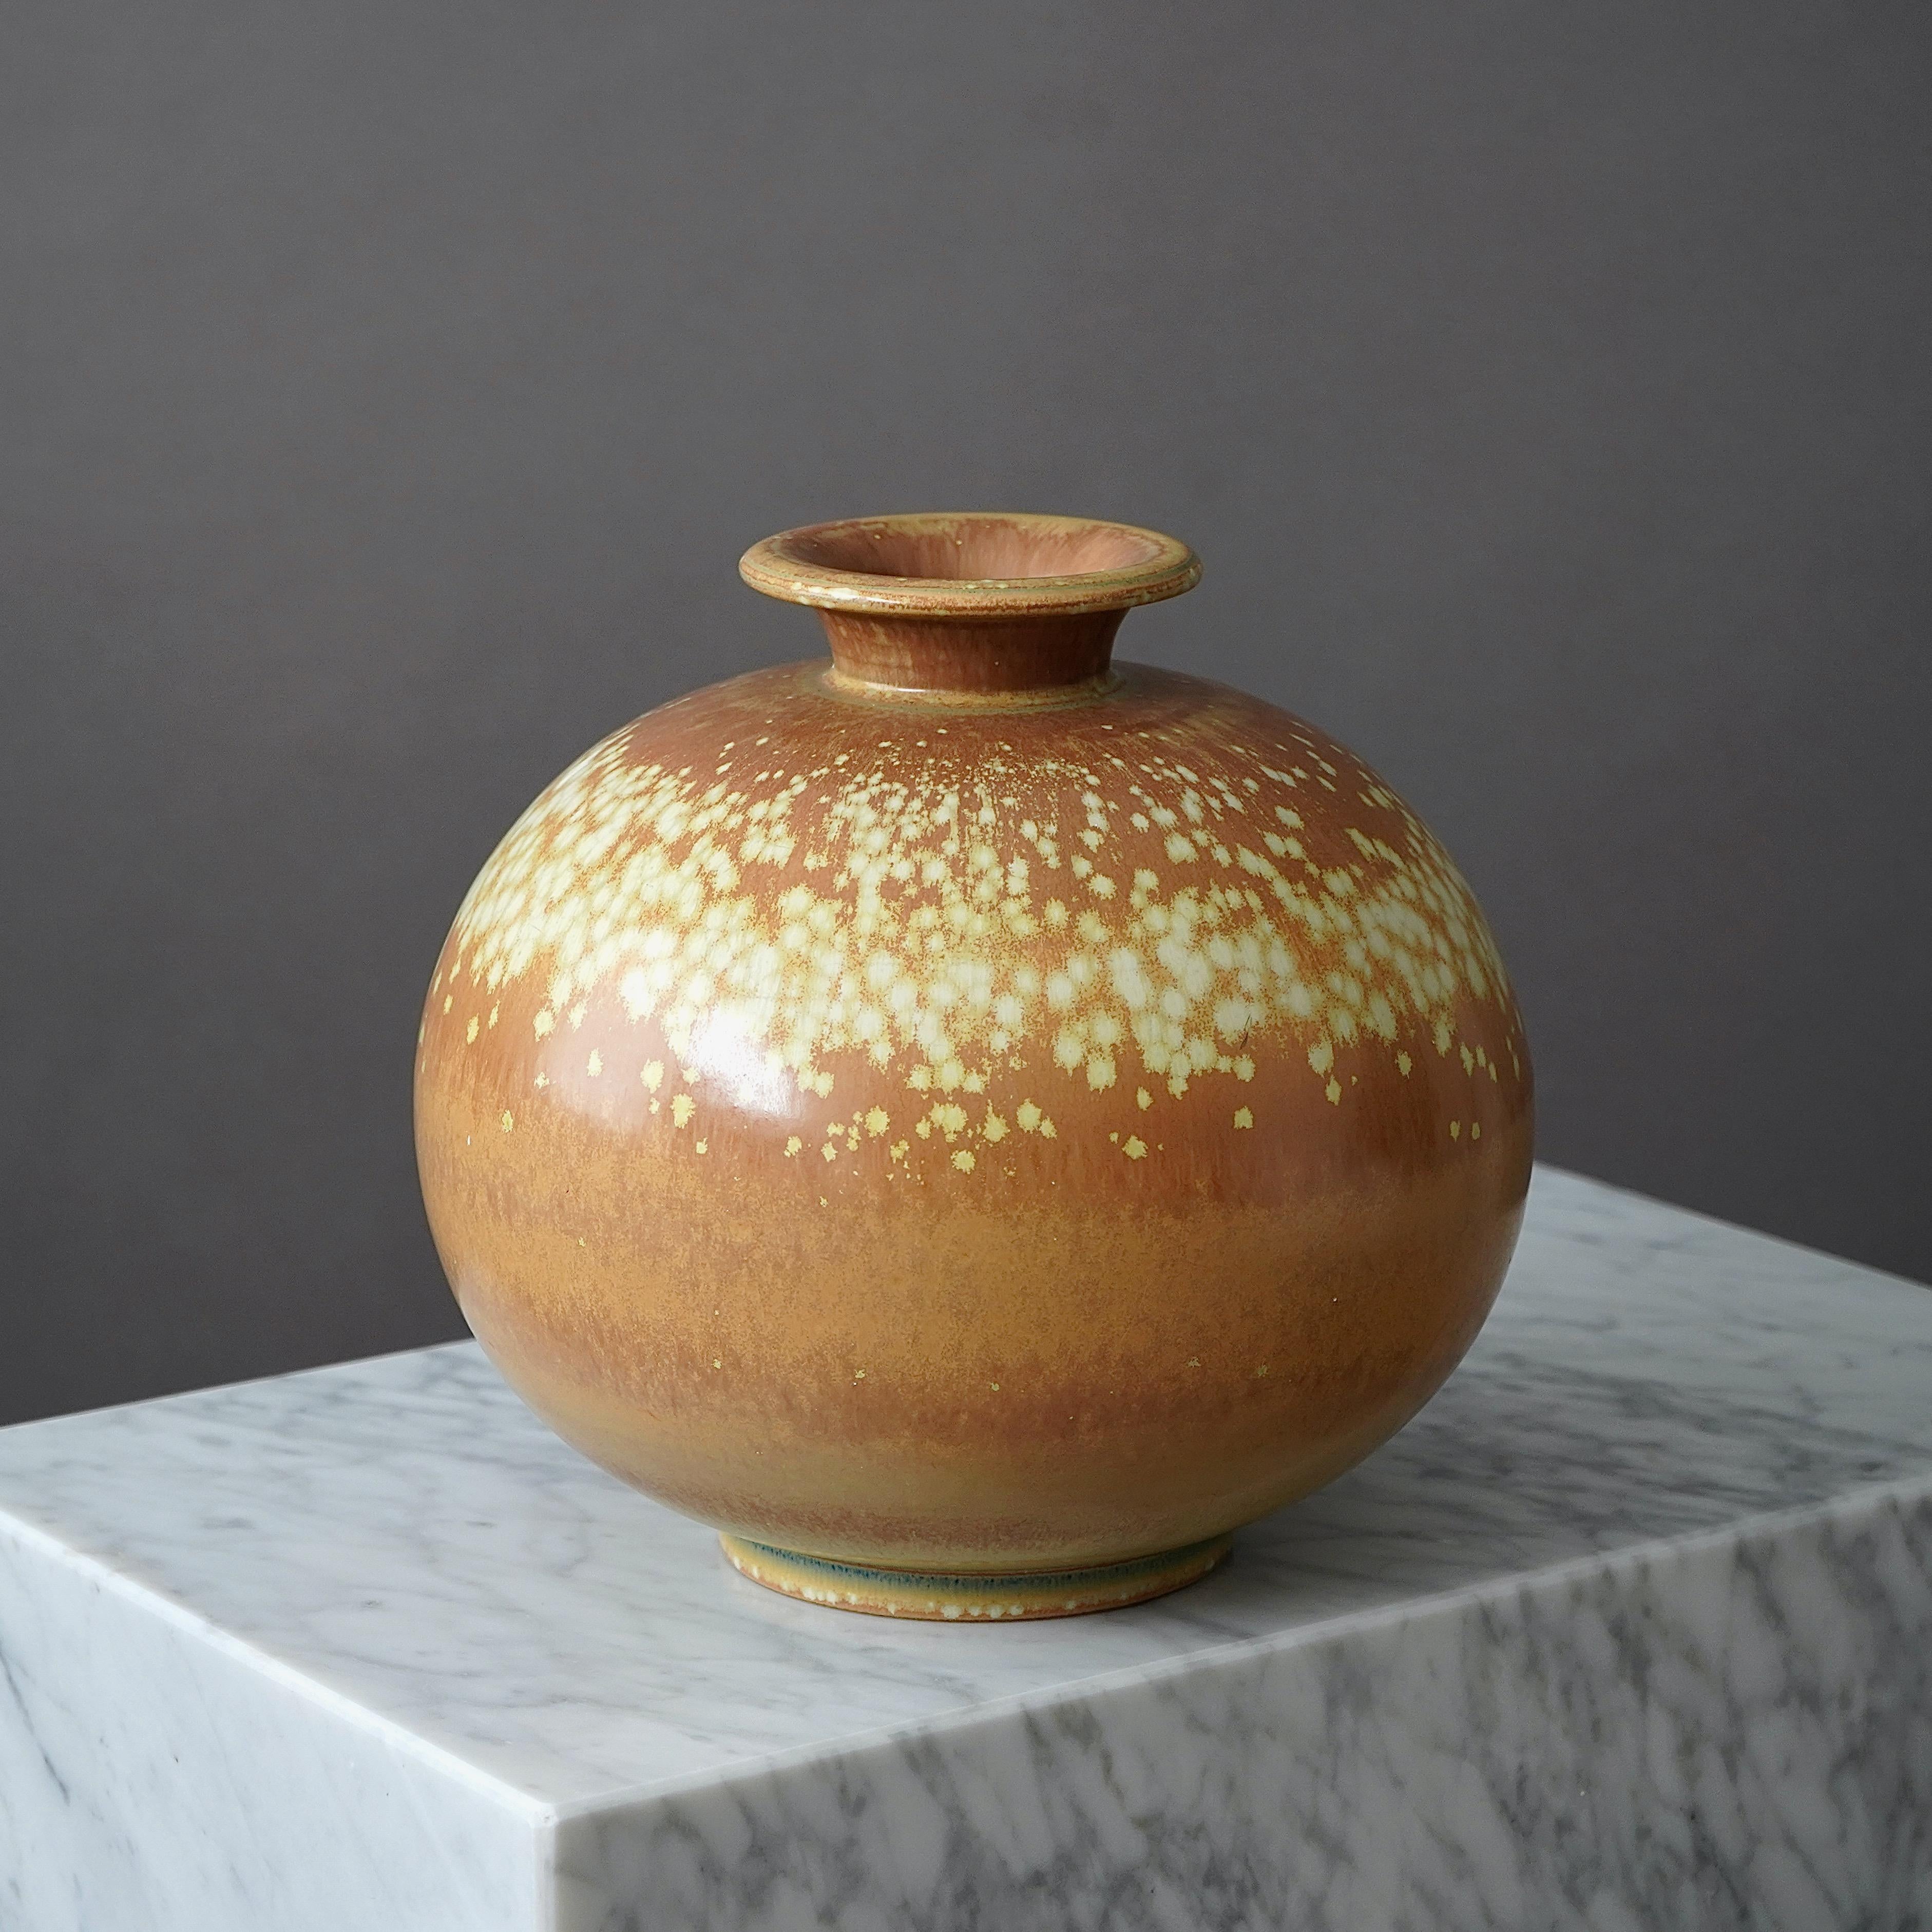 Unique Large Stoneware Vase by Gunnar Nylund for Rorstrand, Sweden, 1940s For Sale 1